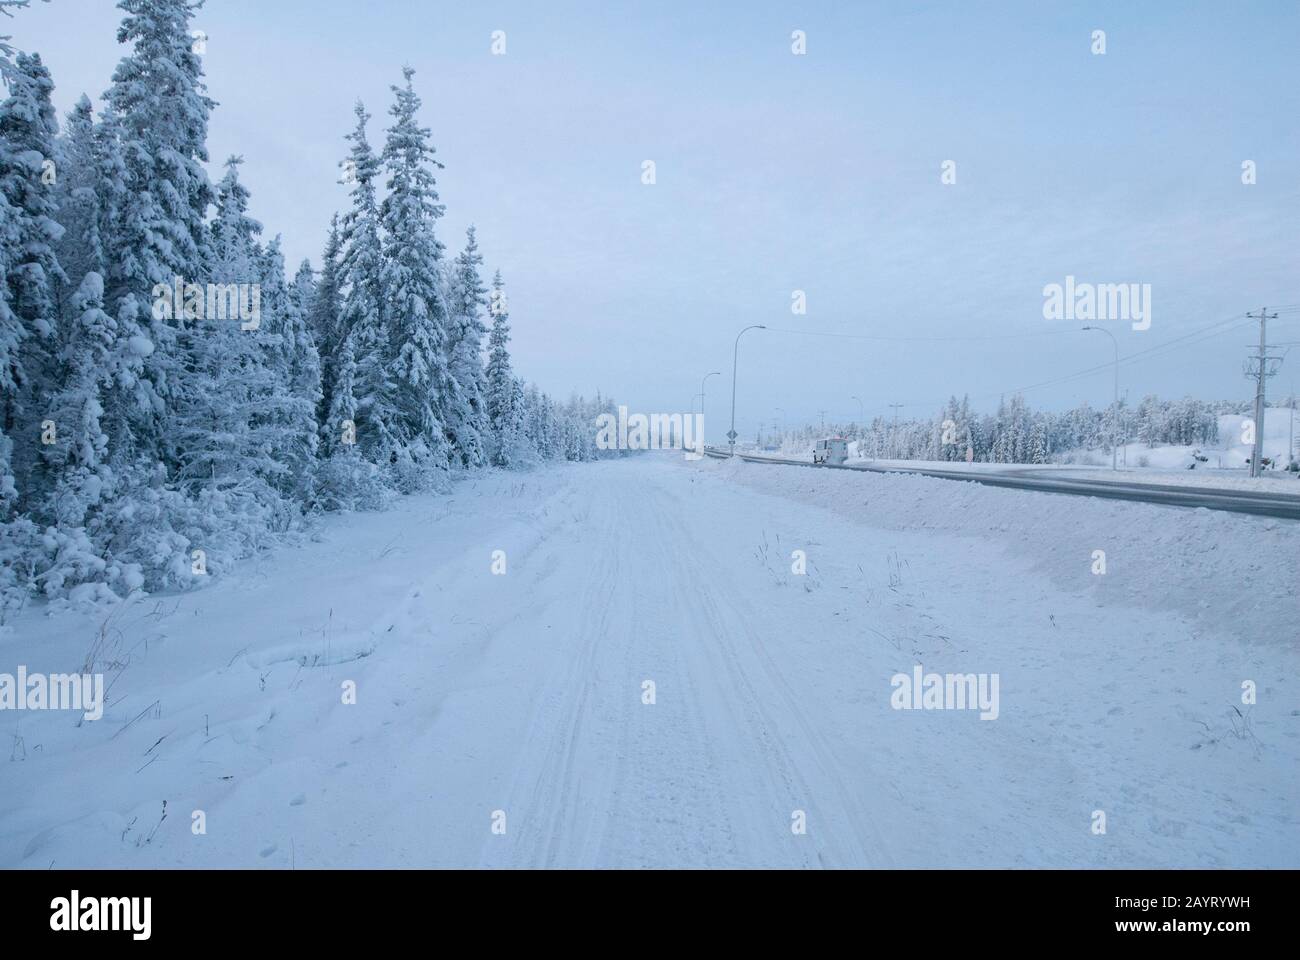 Winter scene by the side of the Yellowknife Highway, Northwest Territories, Canada Stock Photo